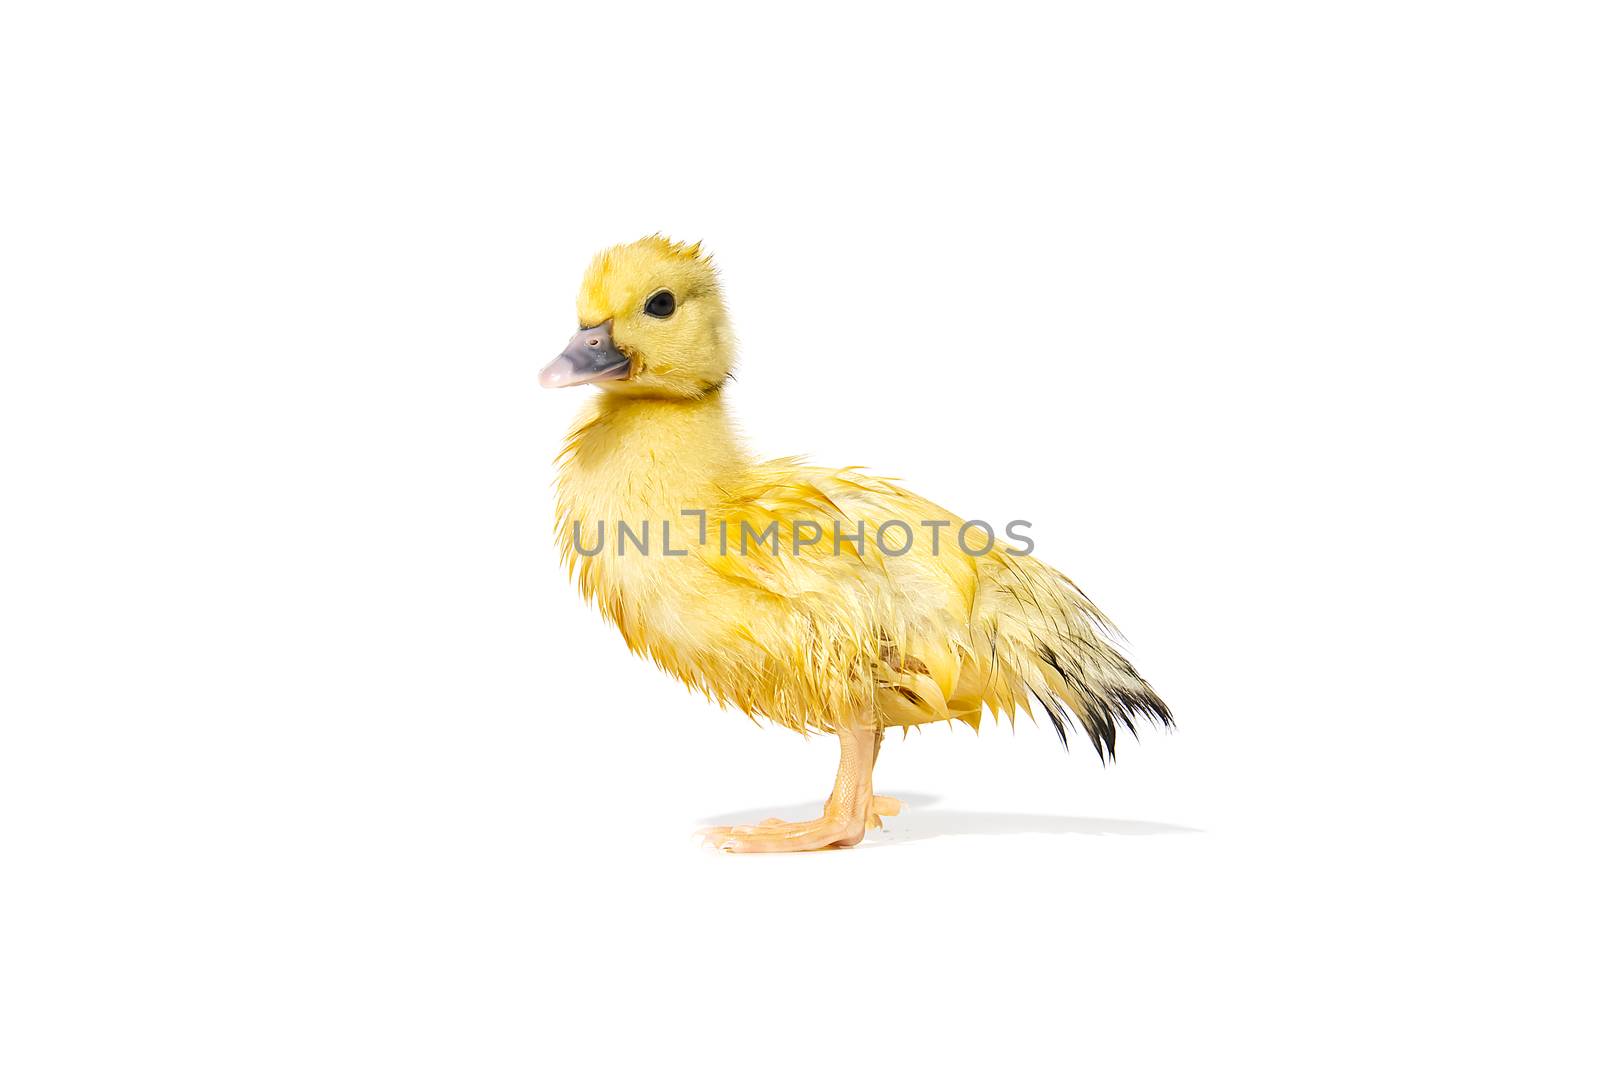 NewBorn little Cute yellow wet duckling isolated on white